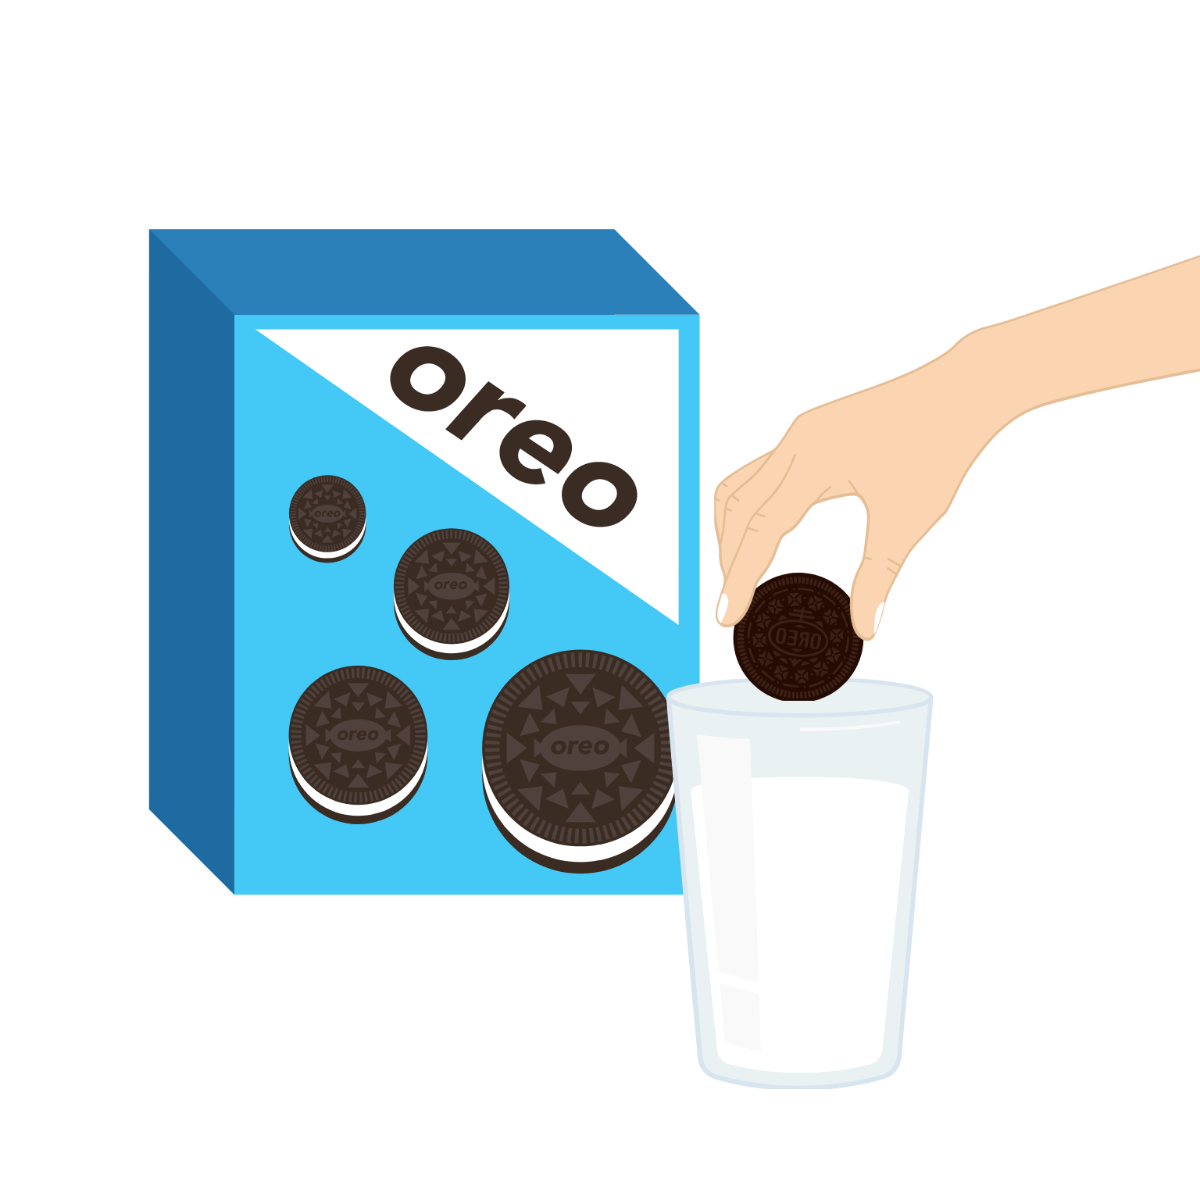 Free National Oreo Cookie Day Illustration Template